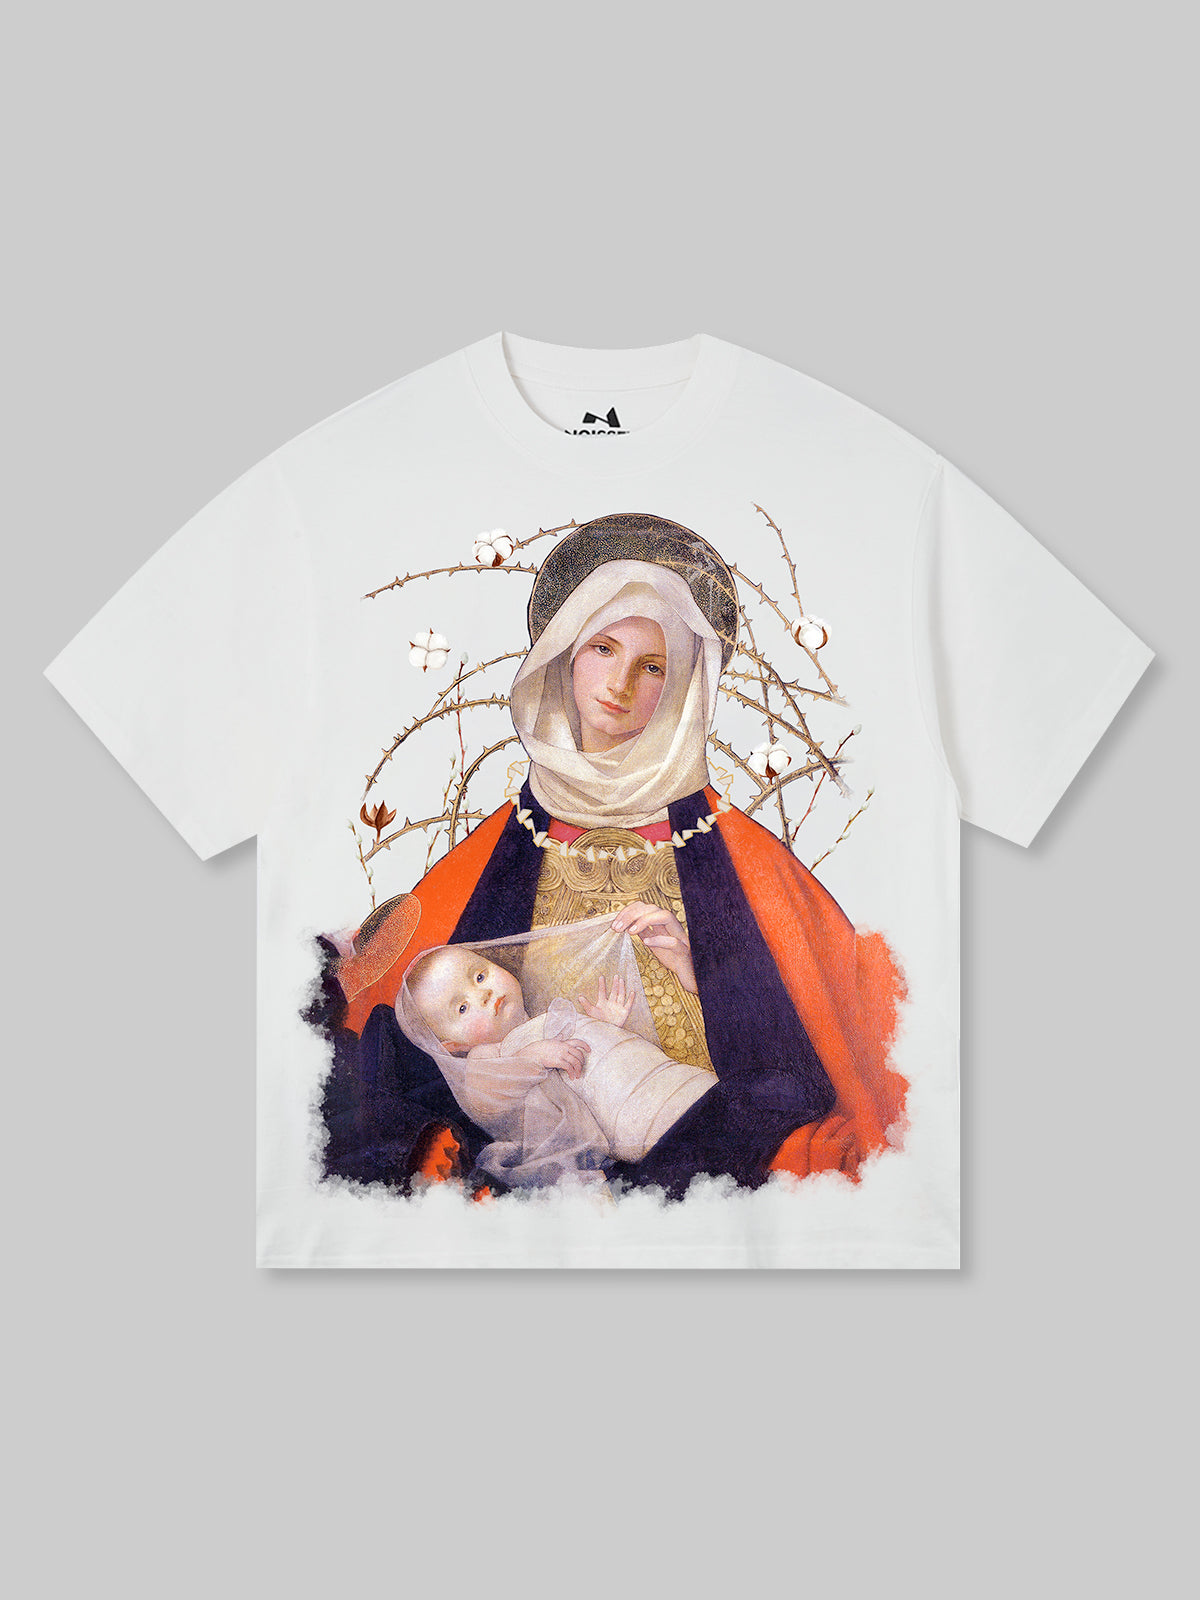 OBSTACLES & DANGERS© Artistic Black Madonna and Child T-shirt